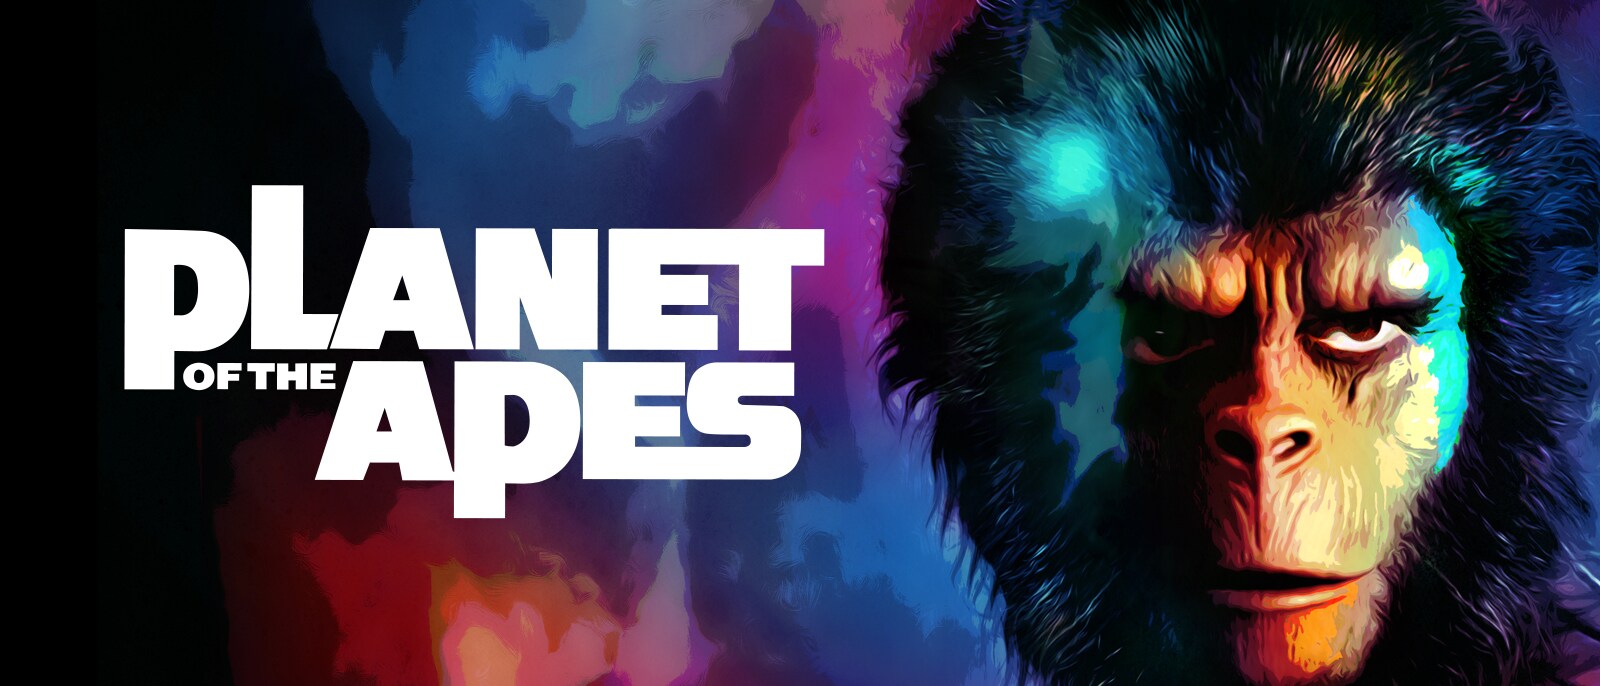 Planet of the Apes 1968 HD Wallpapers and Backgrounds